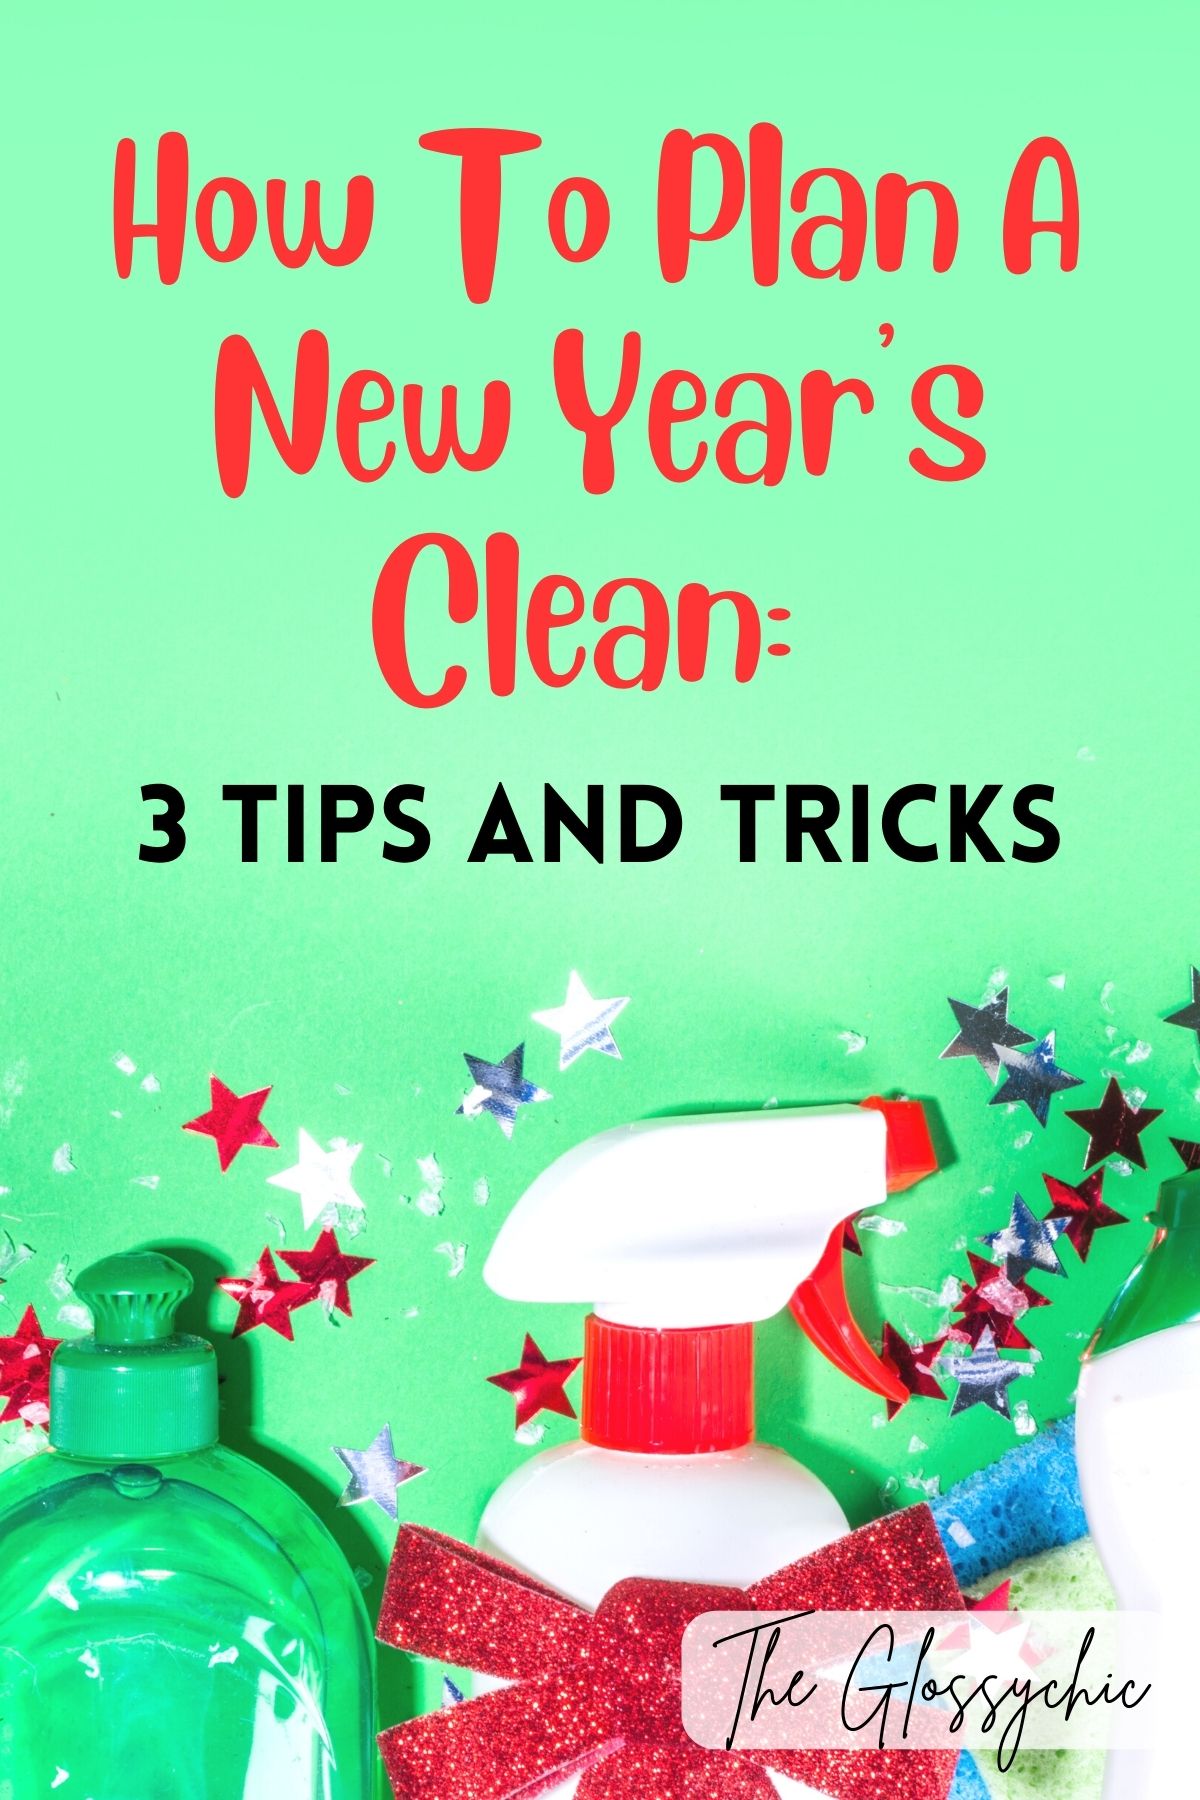 How To Plan A New Year's Clean: 3 Tips And Tricks